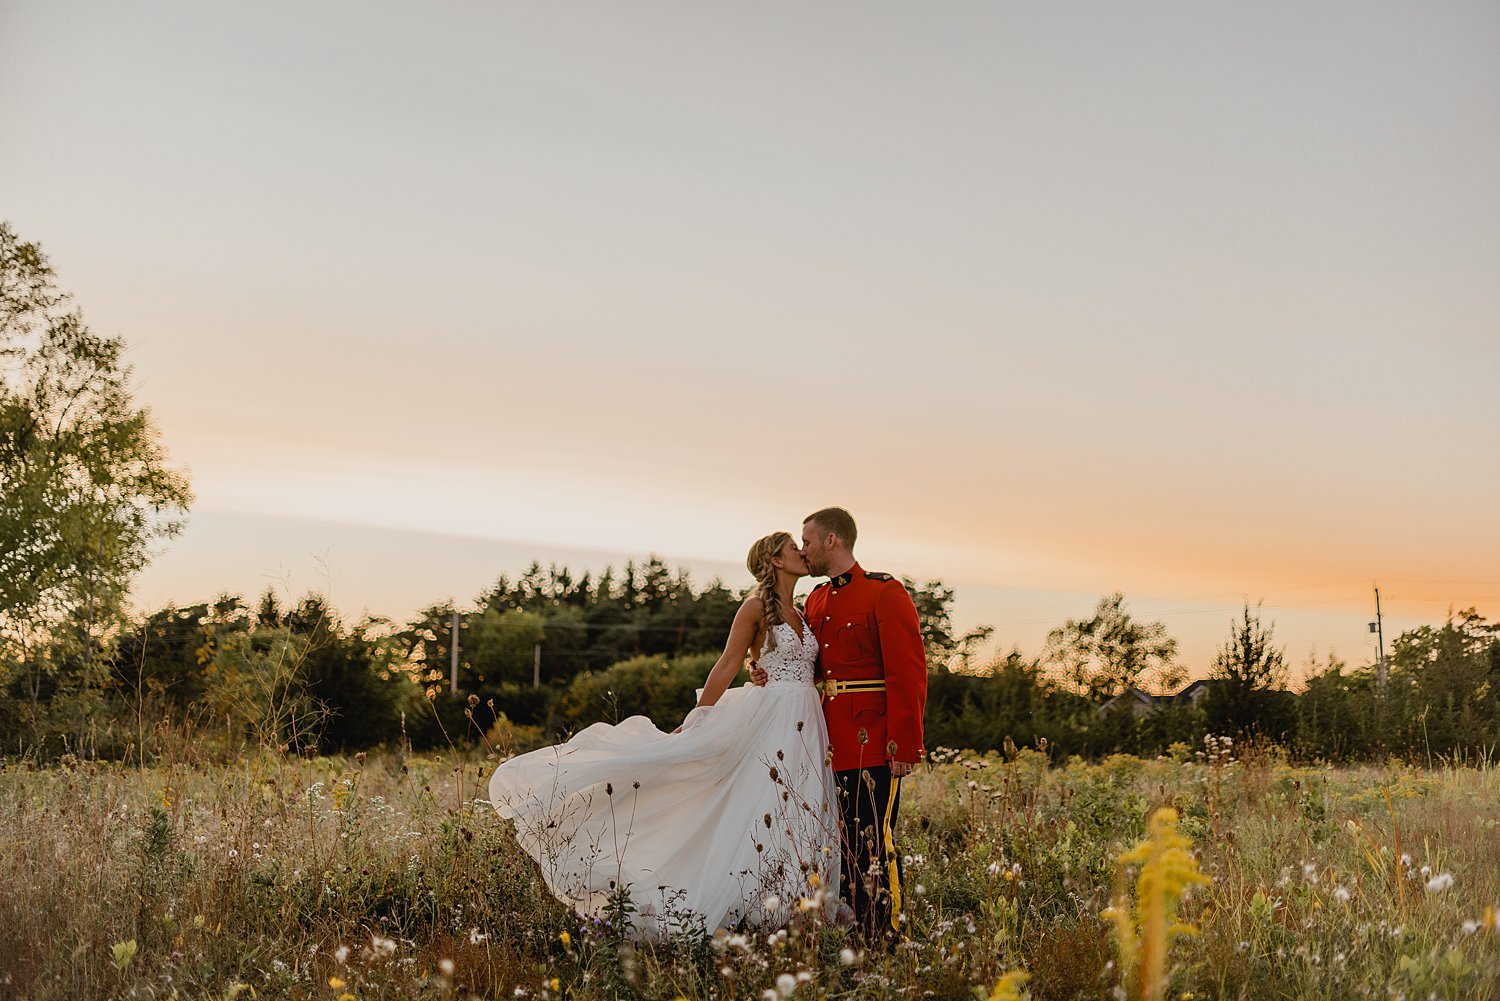 A Royal Canadian Mountie's Intimate Summer Wedding in Prince Edward County | Prince Edward County Wedding Photographer | Holly McMurter Photographs_0091.jpg